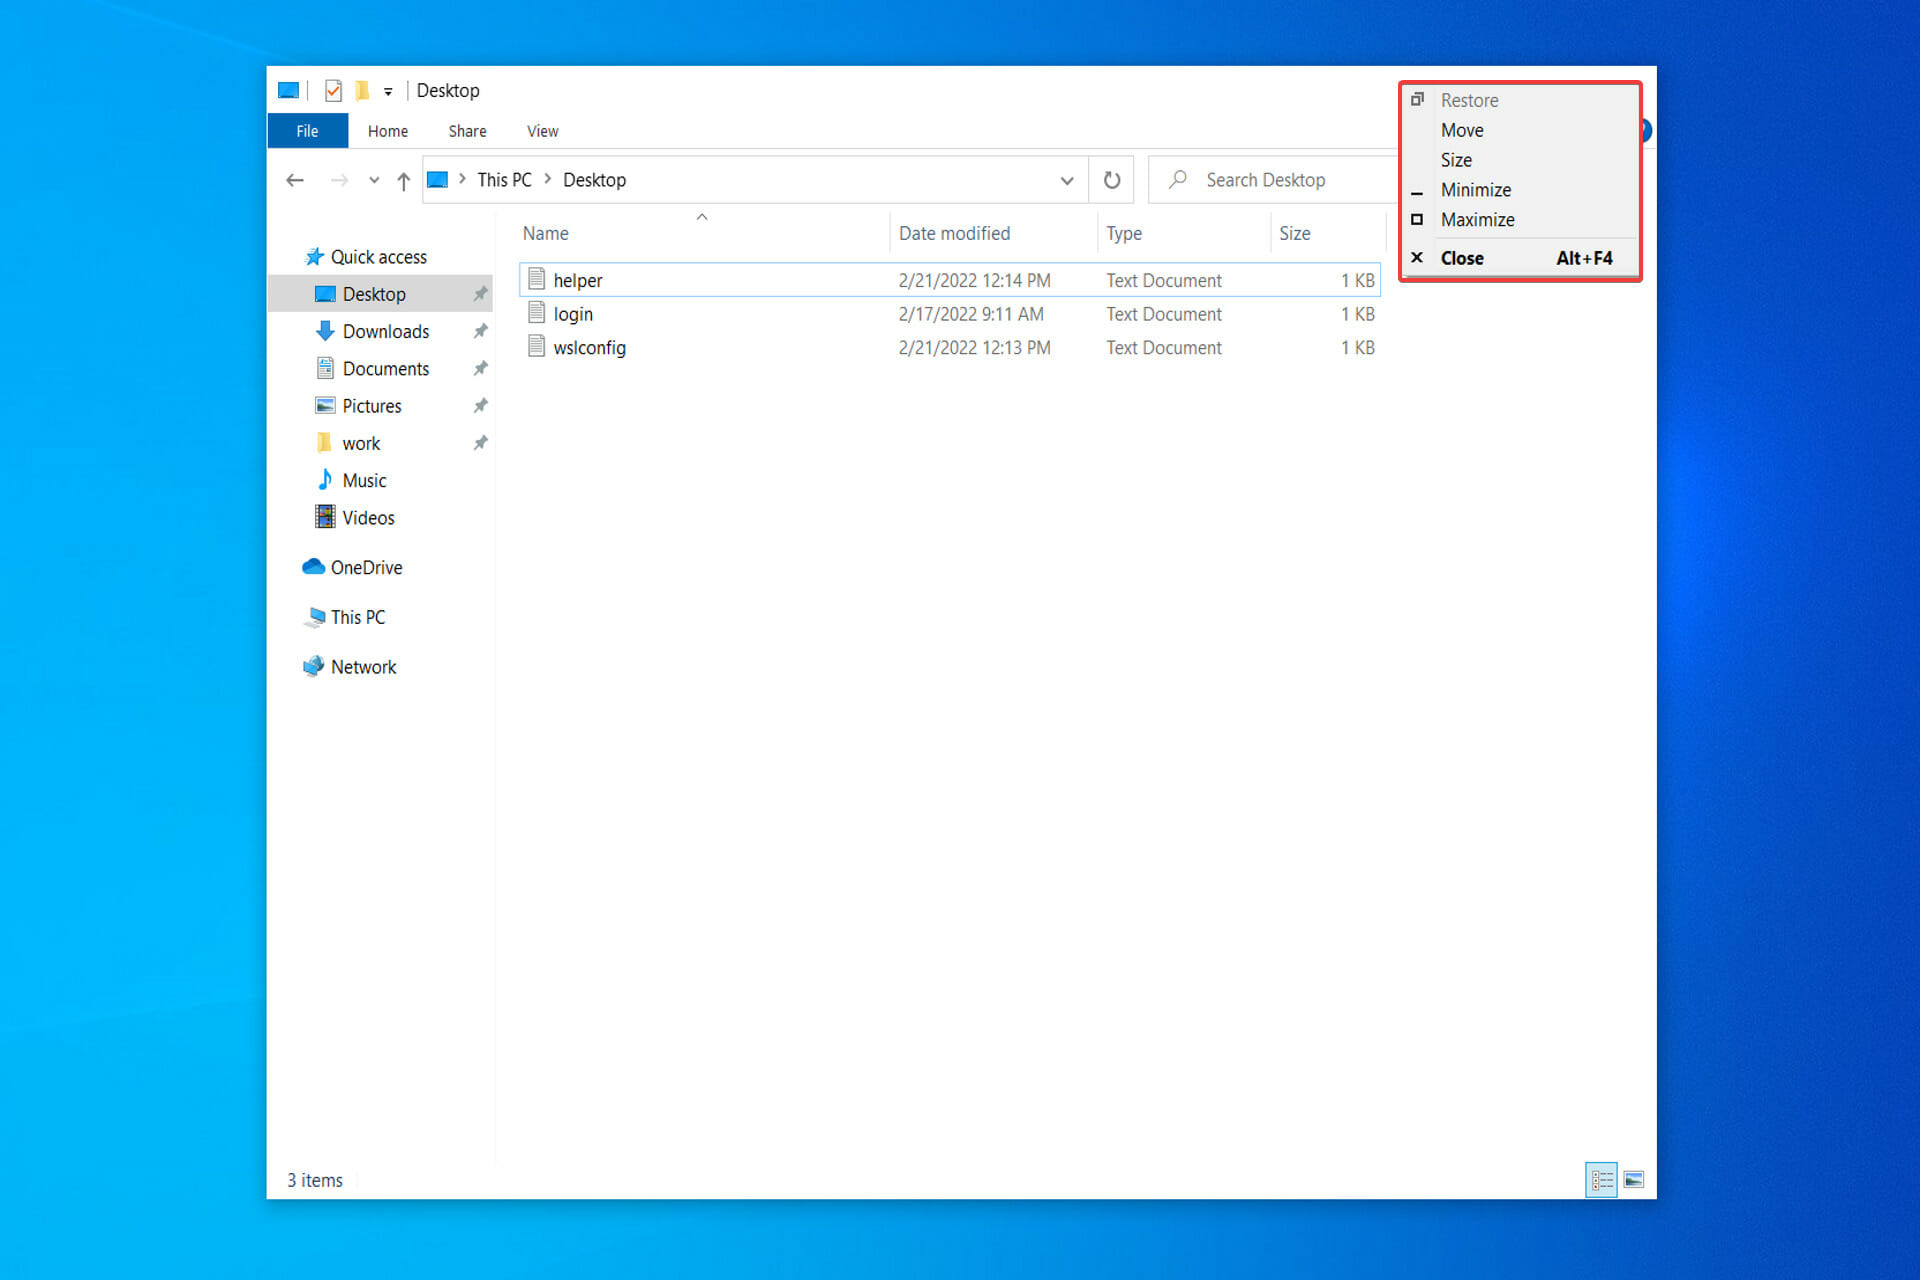 How to Minimize Your Screen in Windows 10